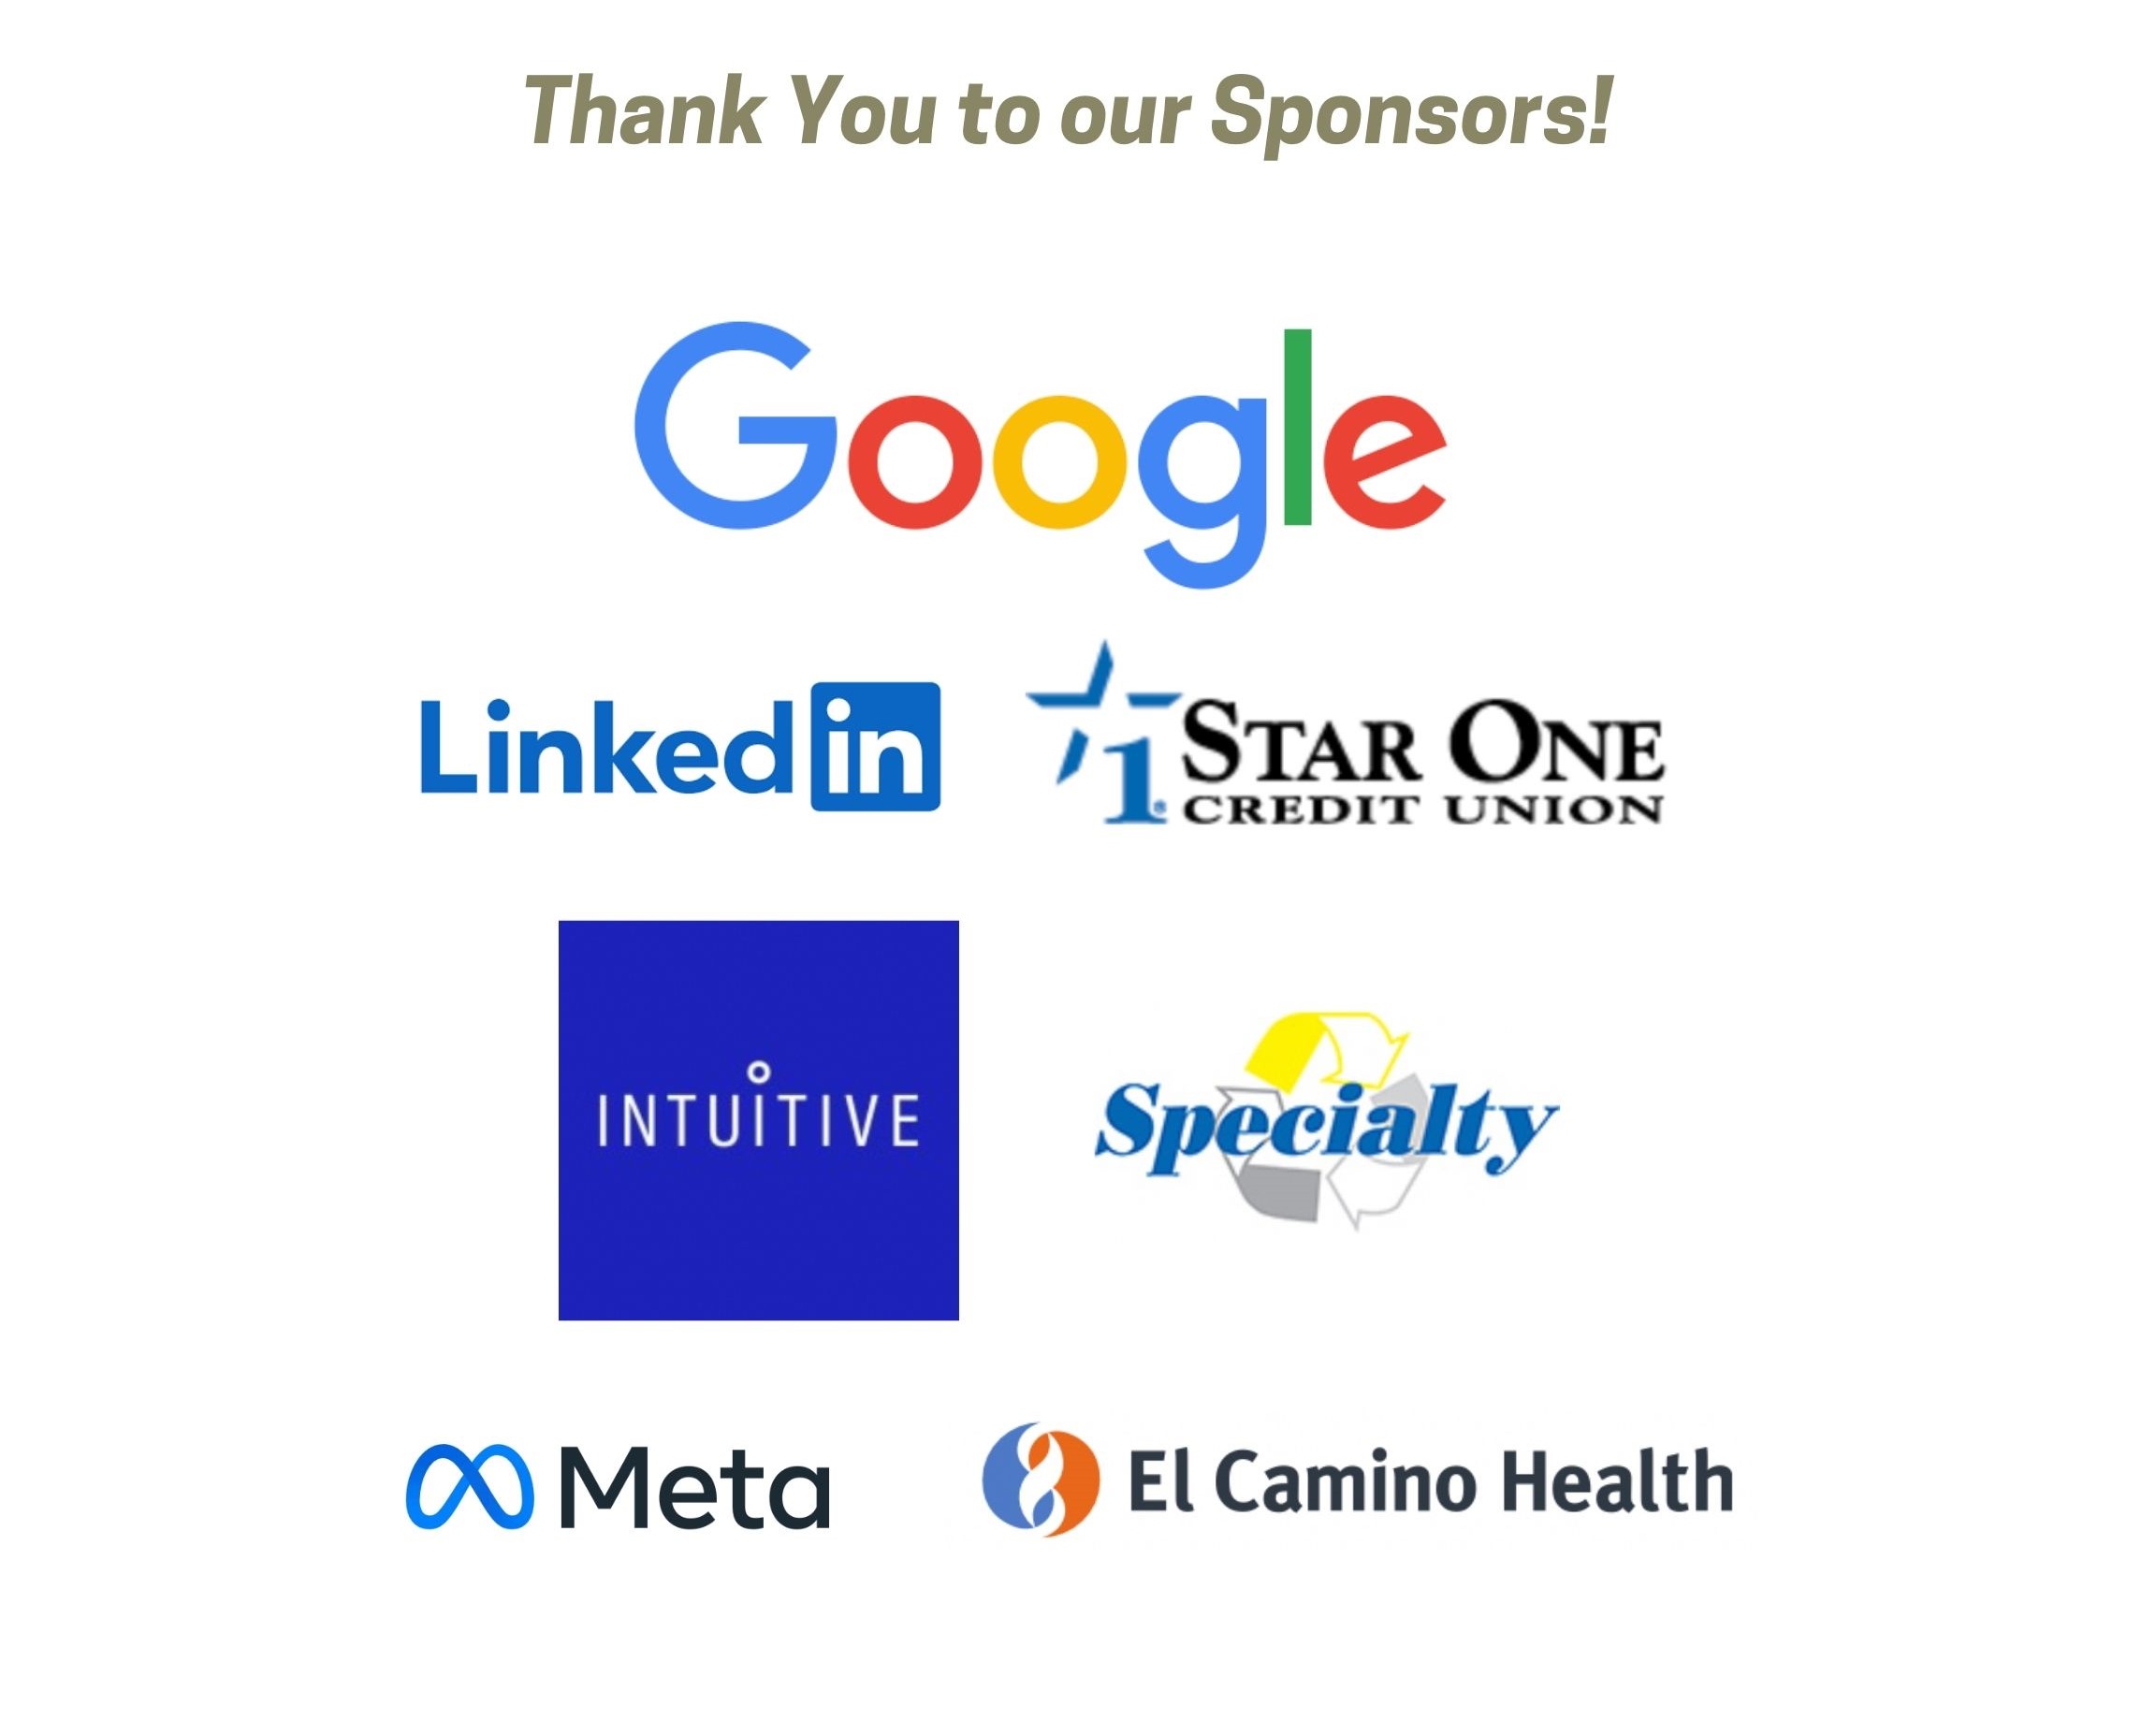 Thank you to our Sponsors: Google, LinkedIn, Star One Credit Union, Intuitive, Specialty, Meta, and El Camino Health